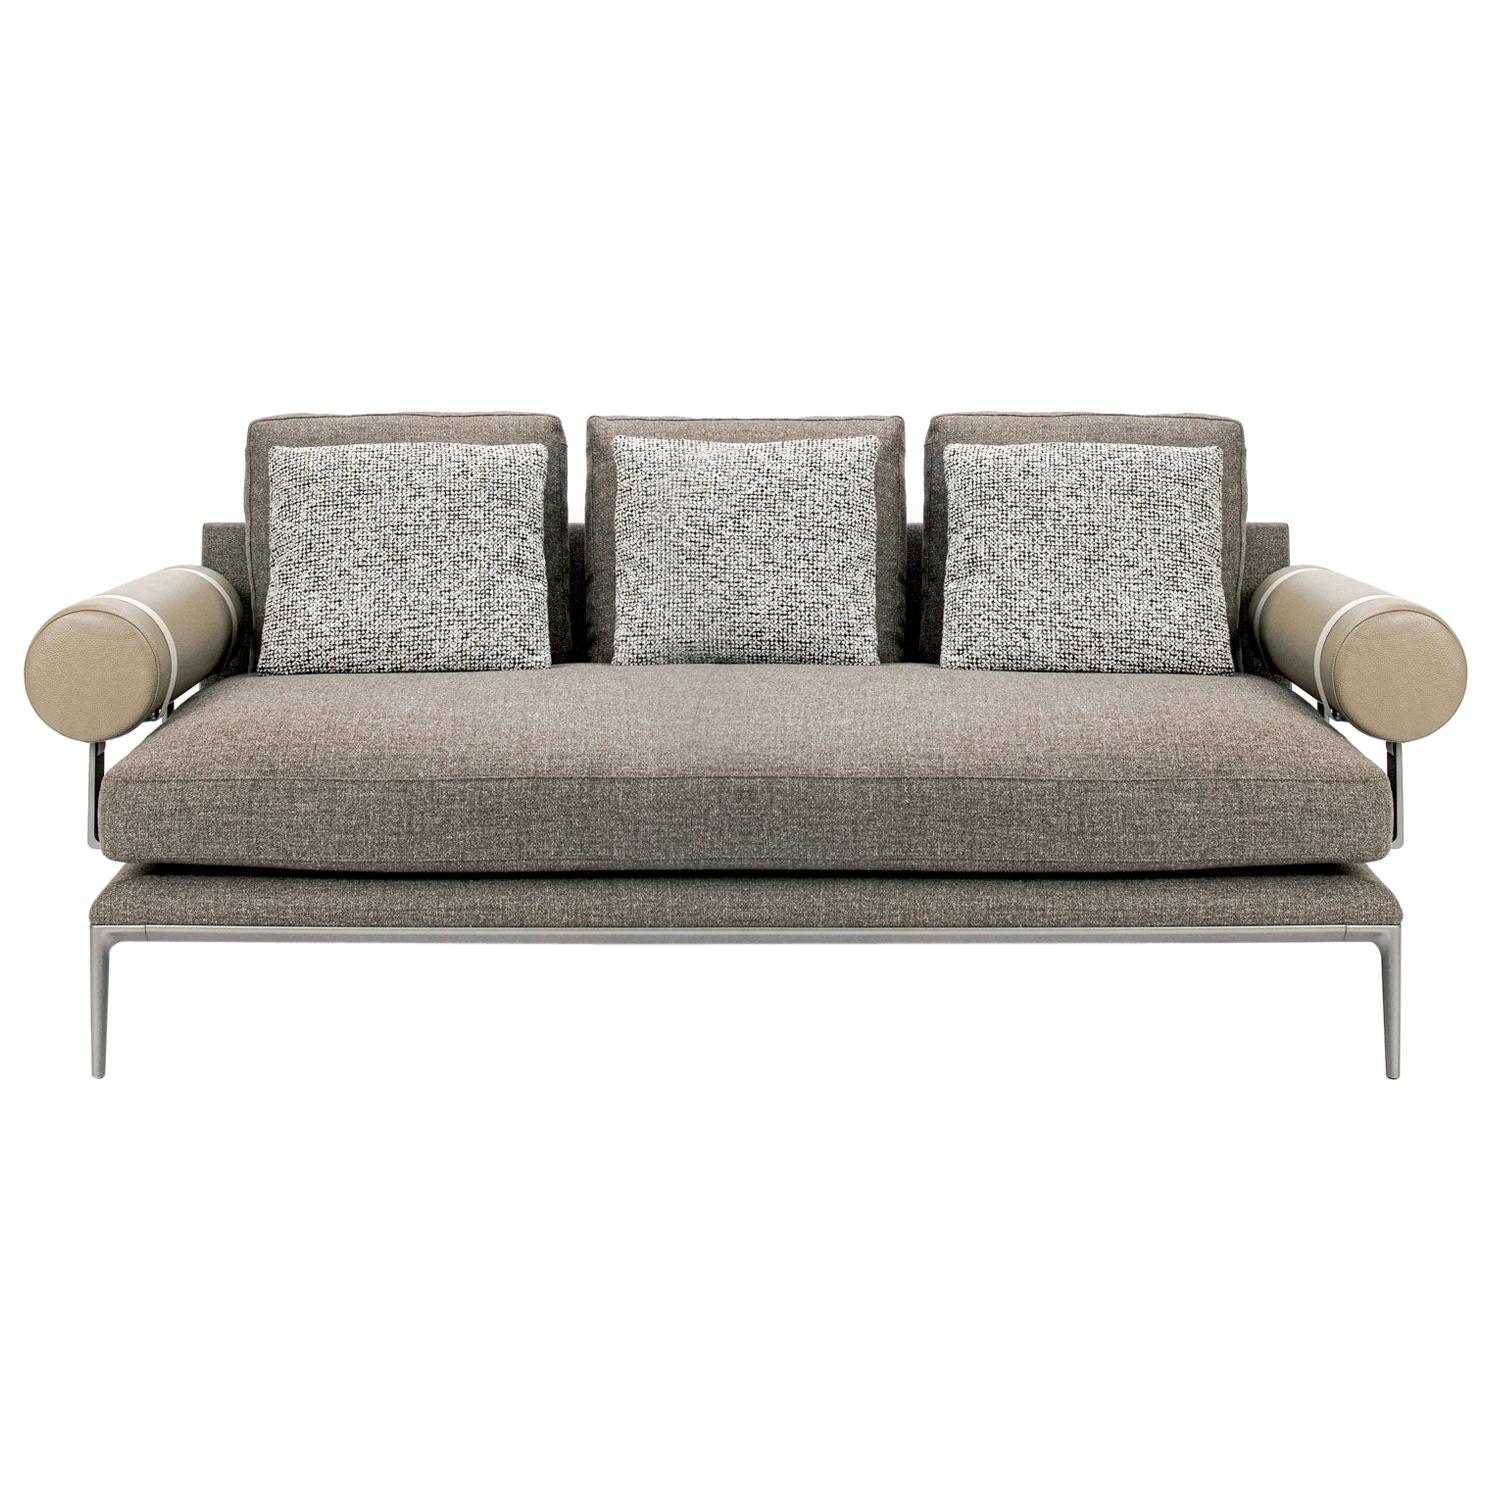 Fabric + Leather Upholstered Sofa with Pewter Painted Steel Frame, B&B Italia